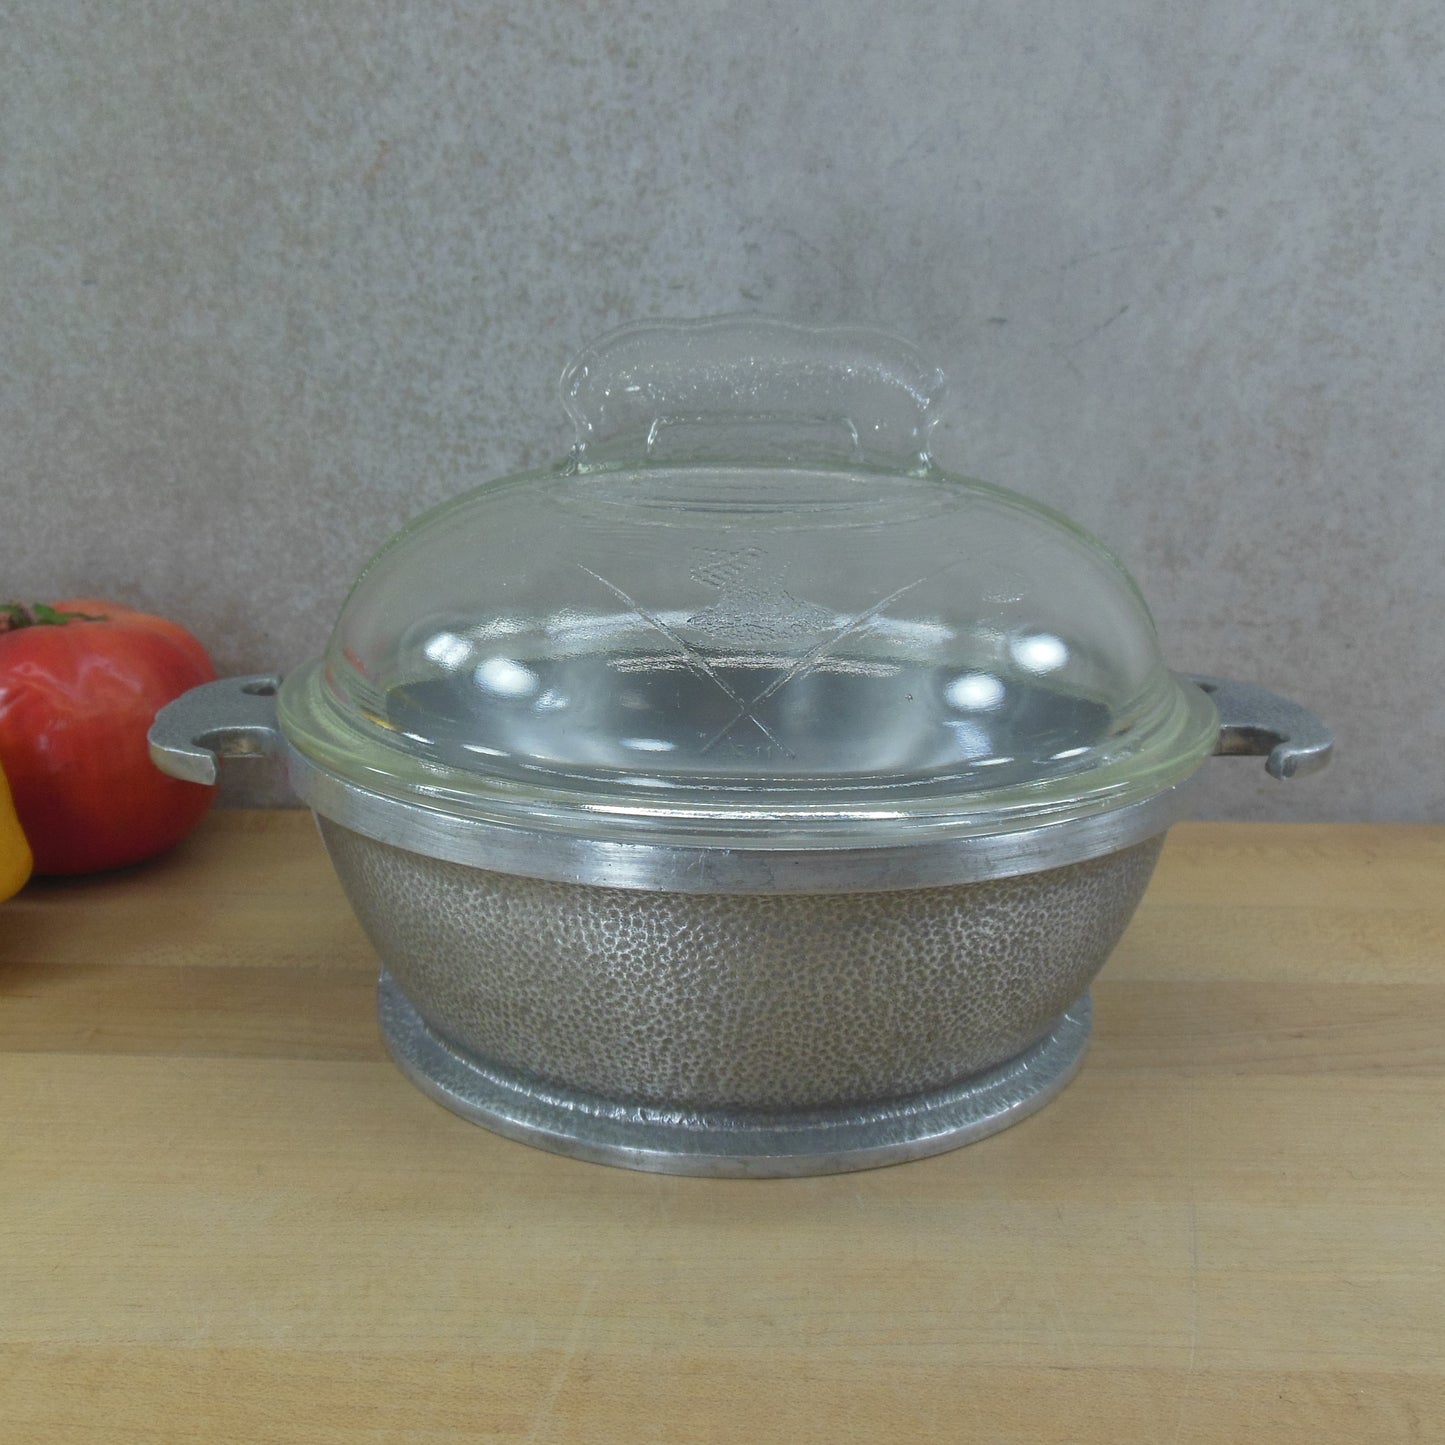 Guardian Service Ware 1 Quart Domed Cooker Pot Glass Lid - Discounted